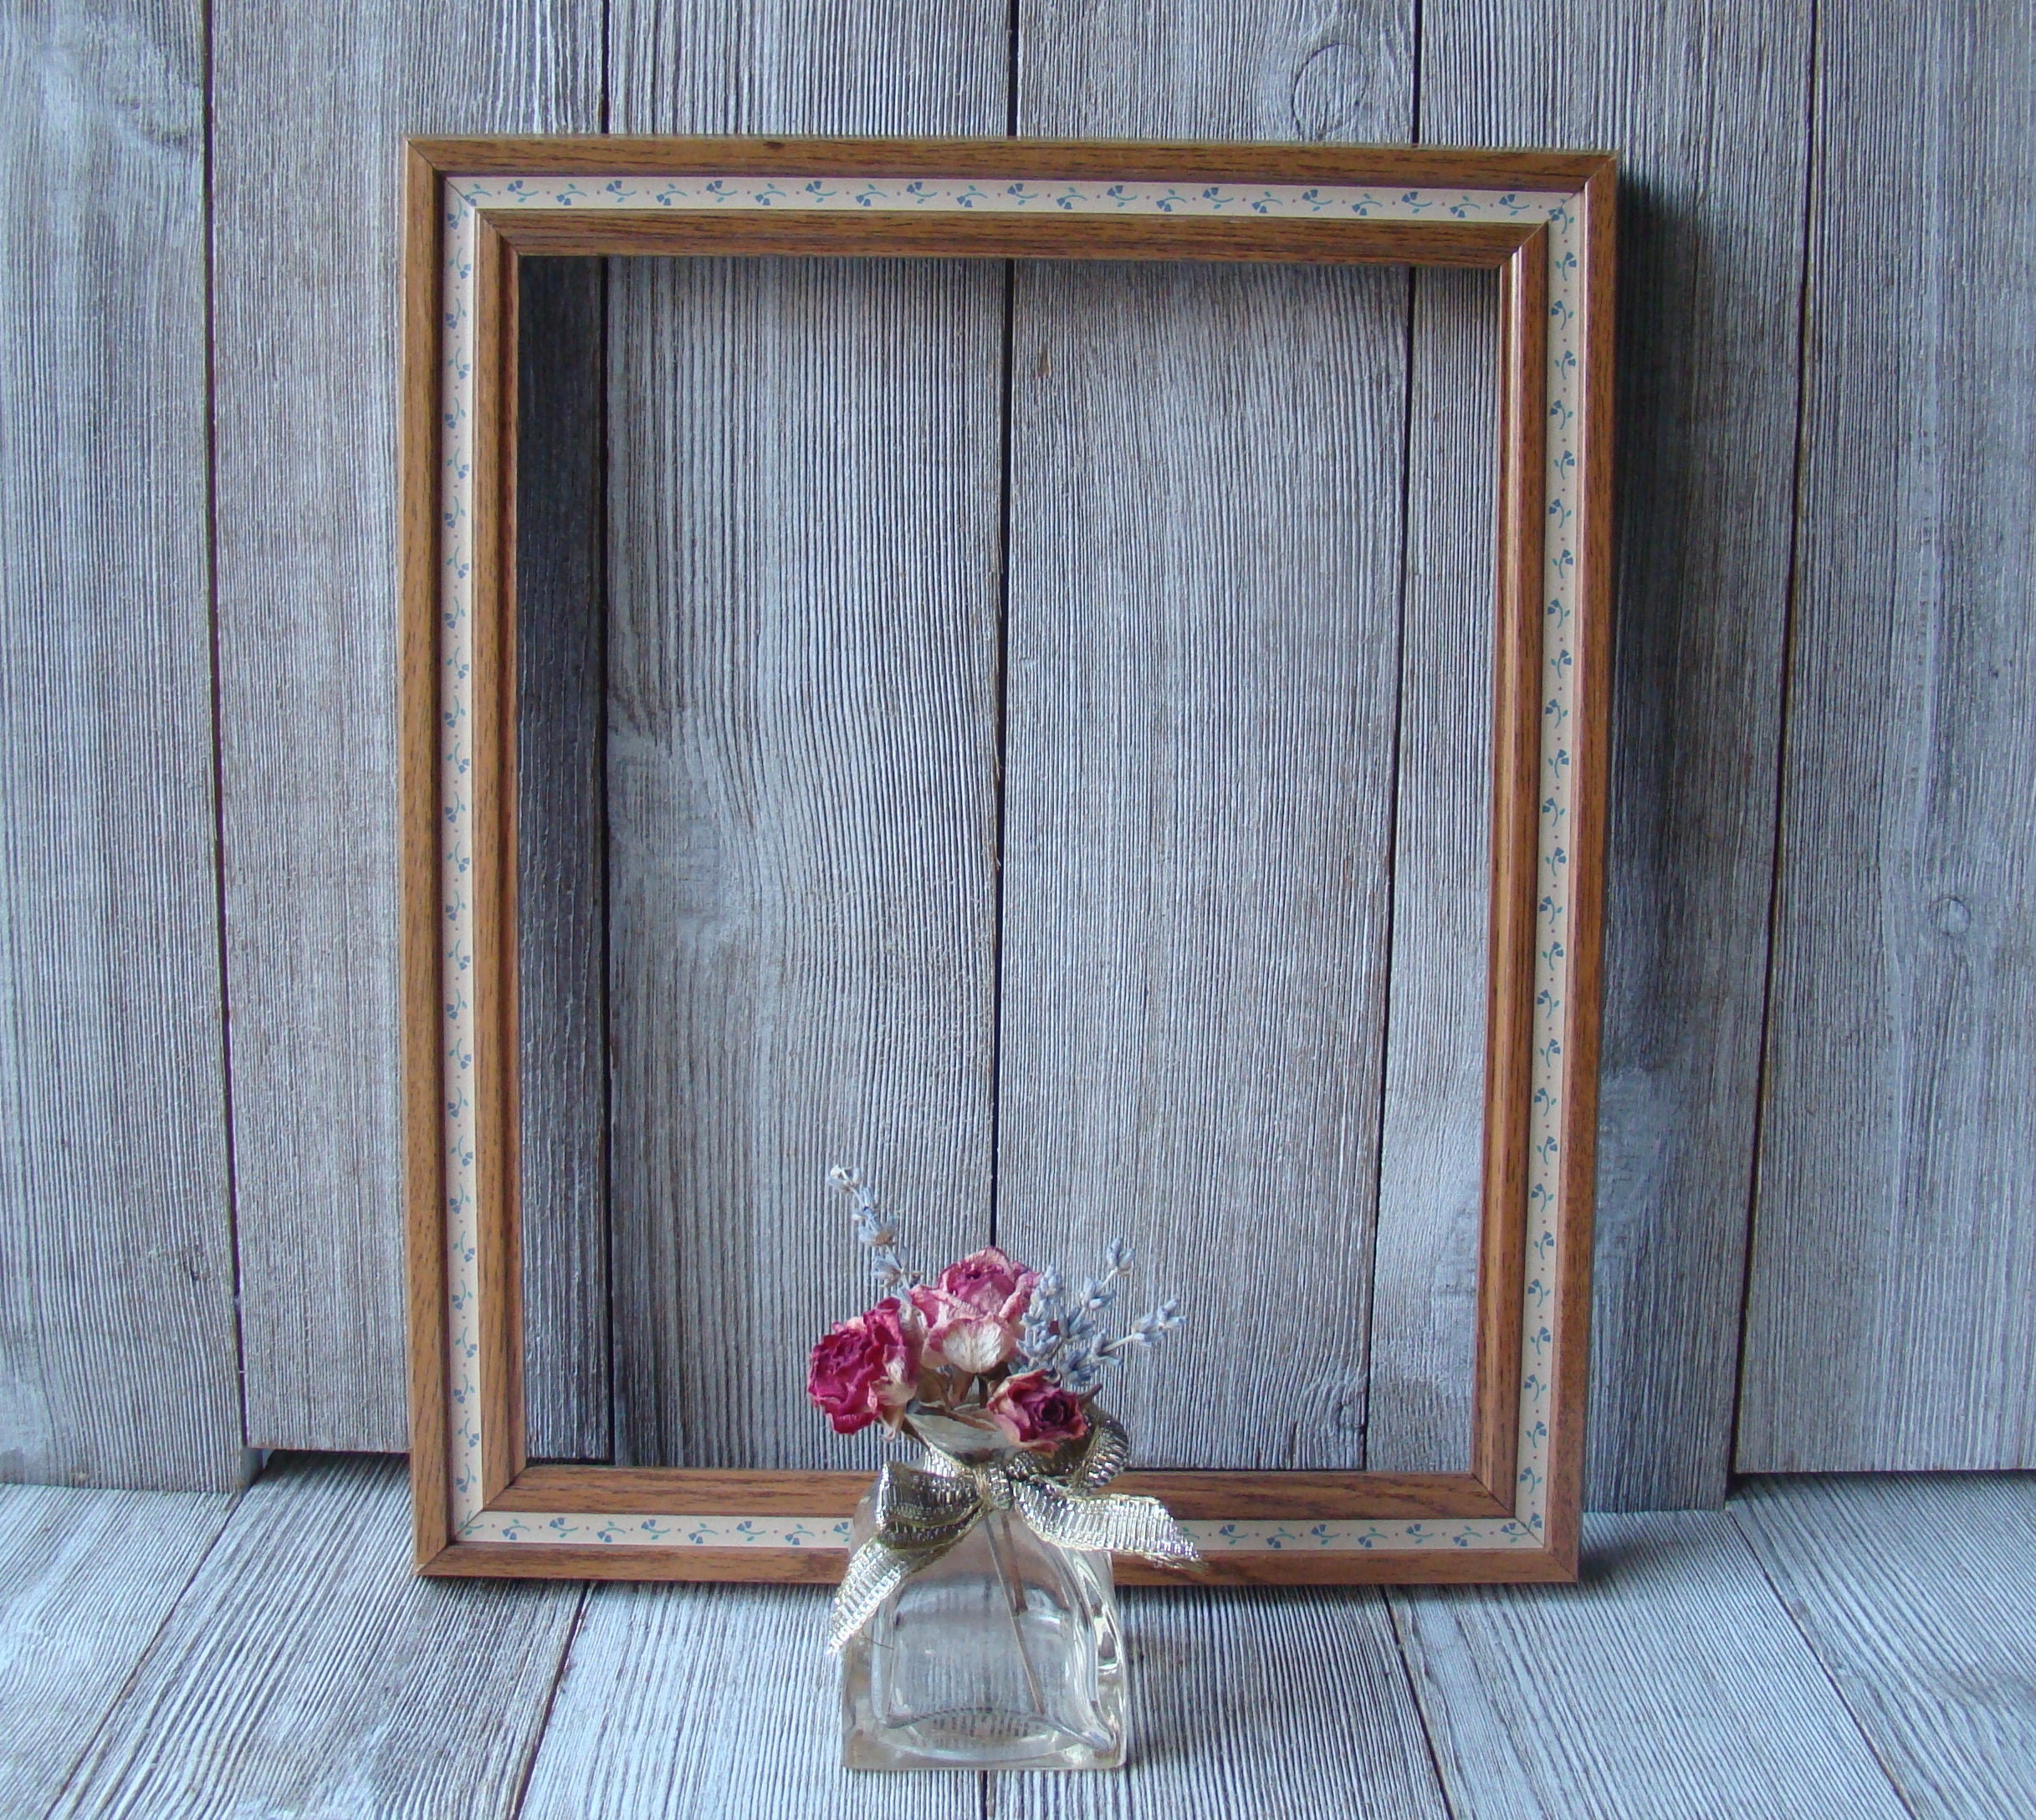 4x6 Barnwood Picture Frames, Medium Width 2.75 inch Lighthouse Series